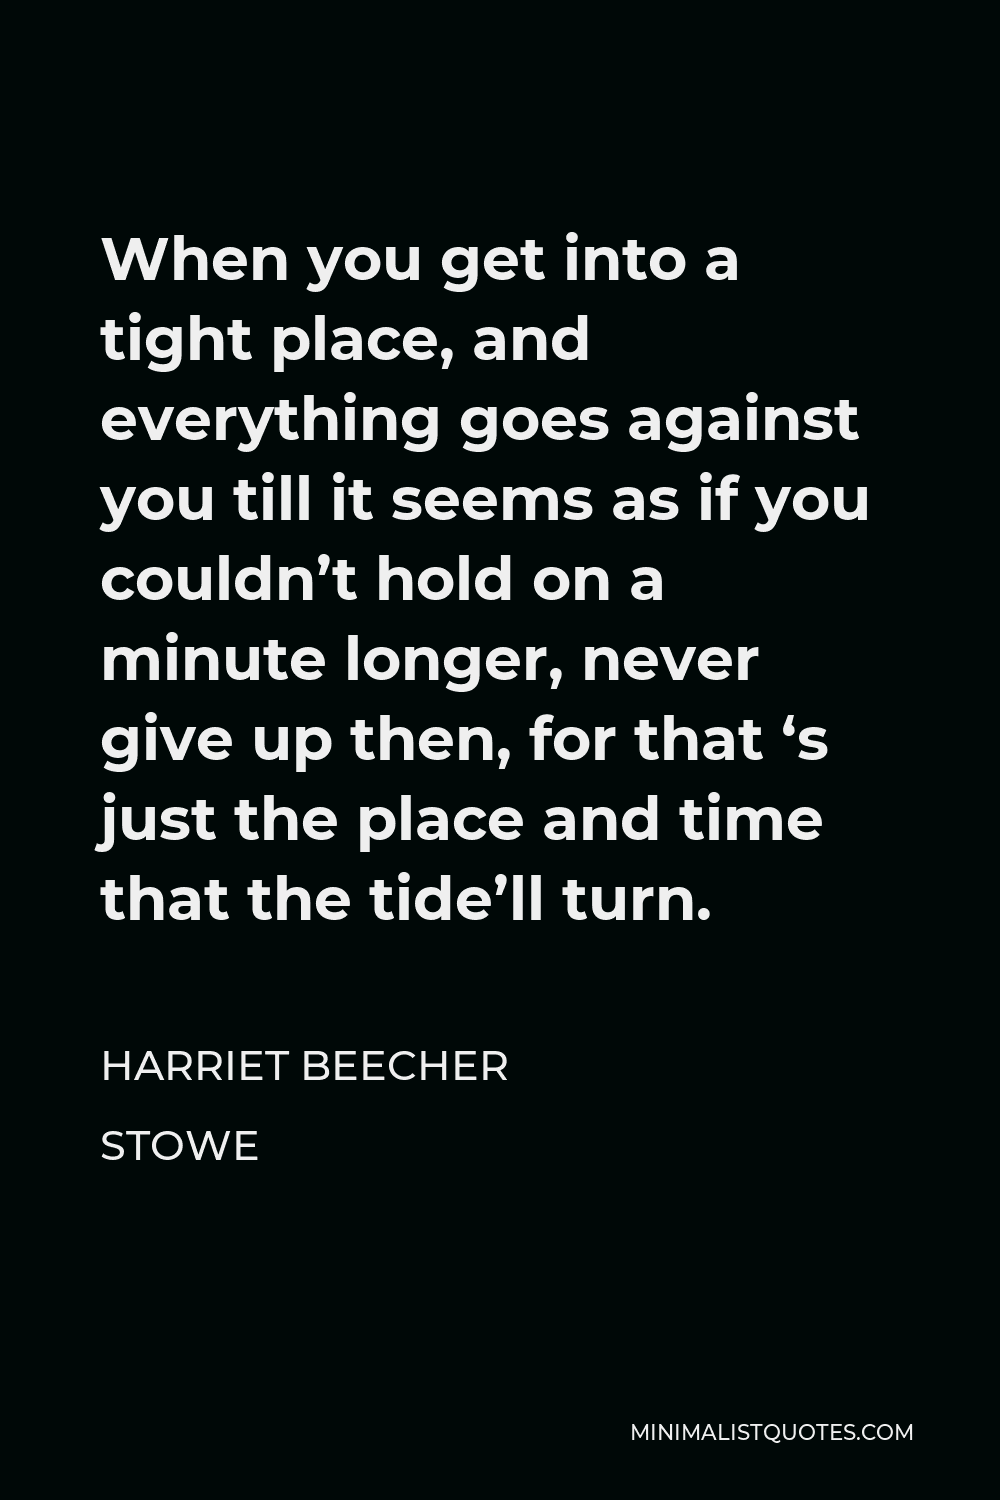 Harriet Beecher Stowe Quote - When you get into a tight place, and everything goes against you till it seems as if you couldn’t hold on a minute longer, never give up then, for that ‘s just the place and time that the tide’ll turn.